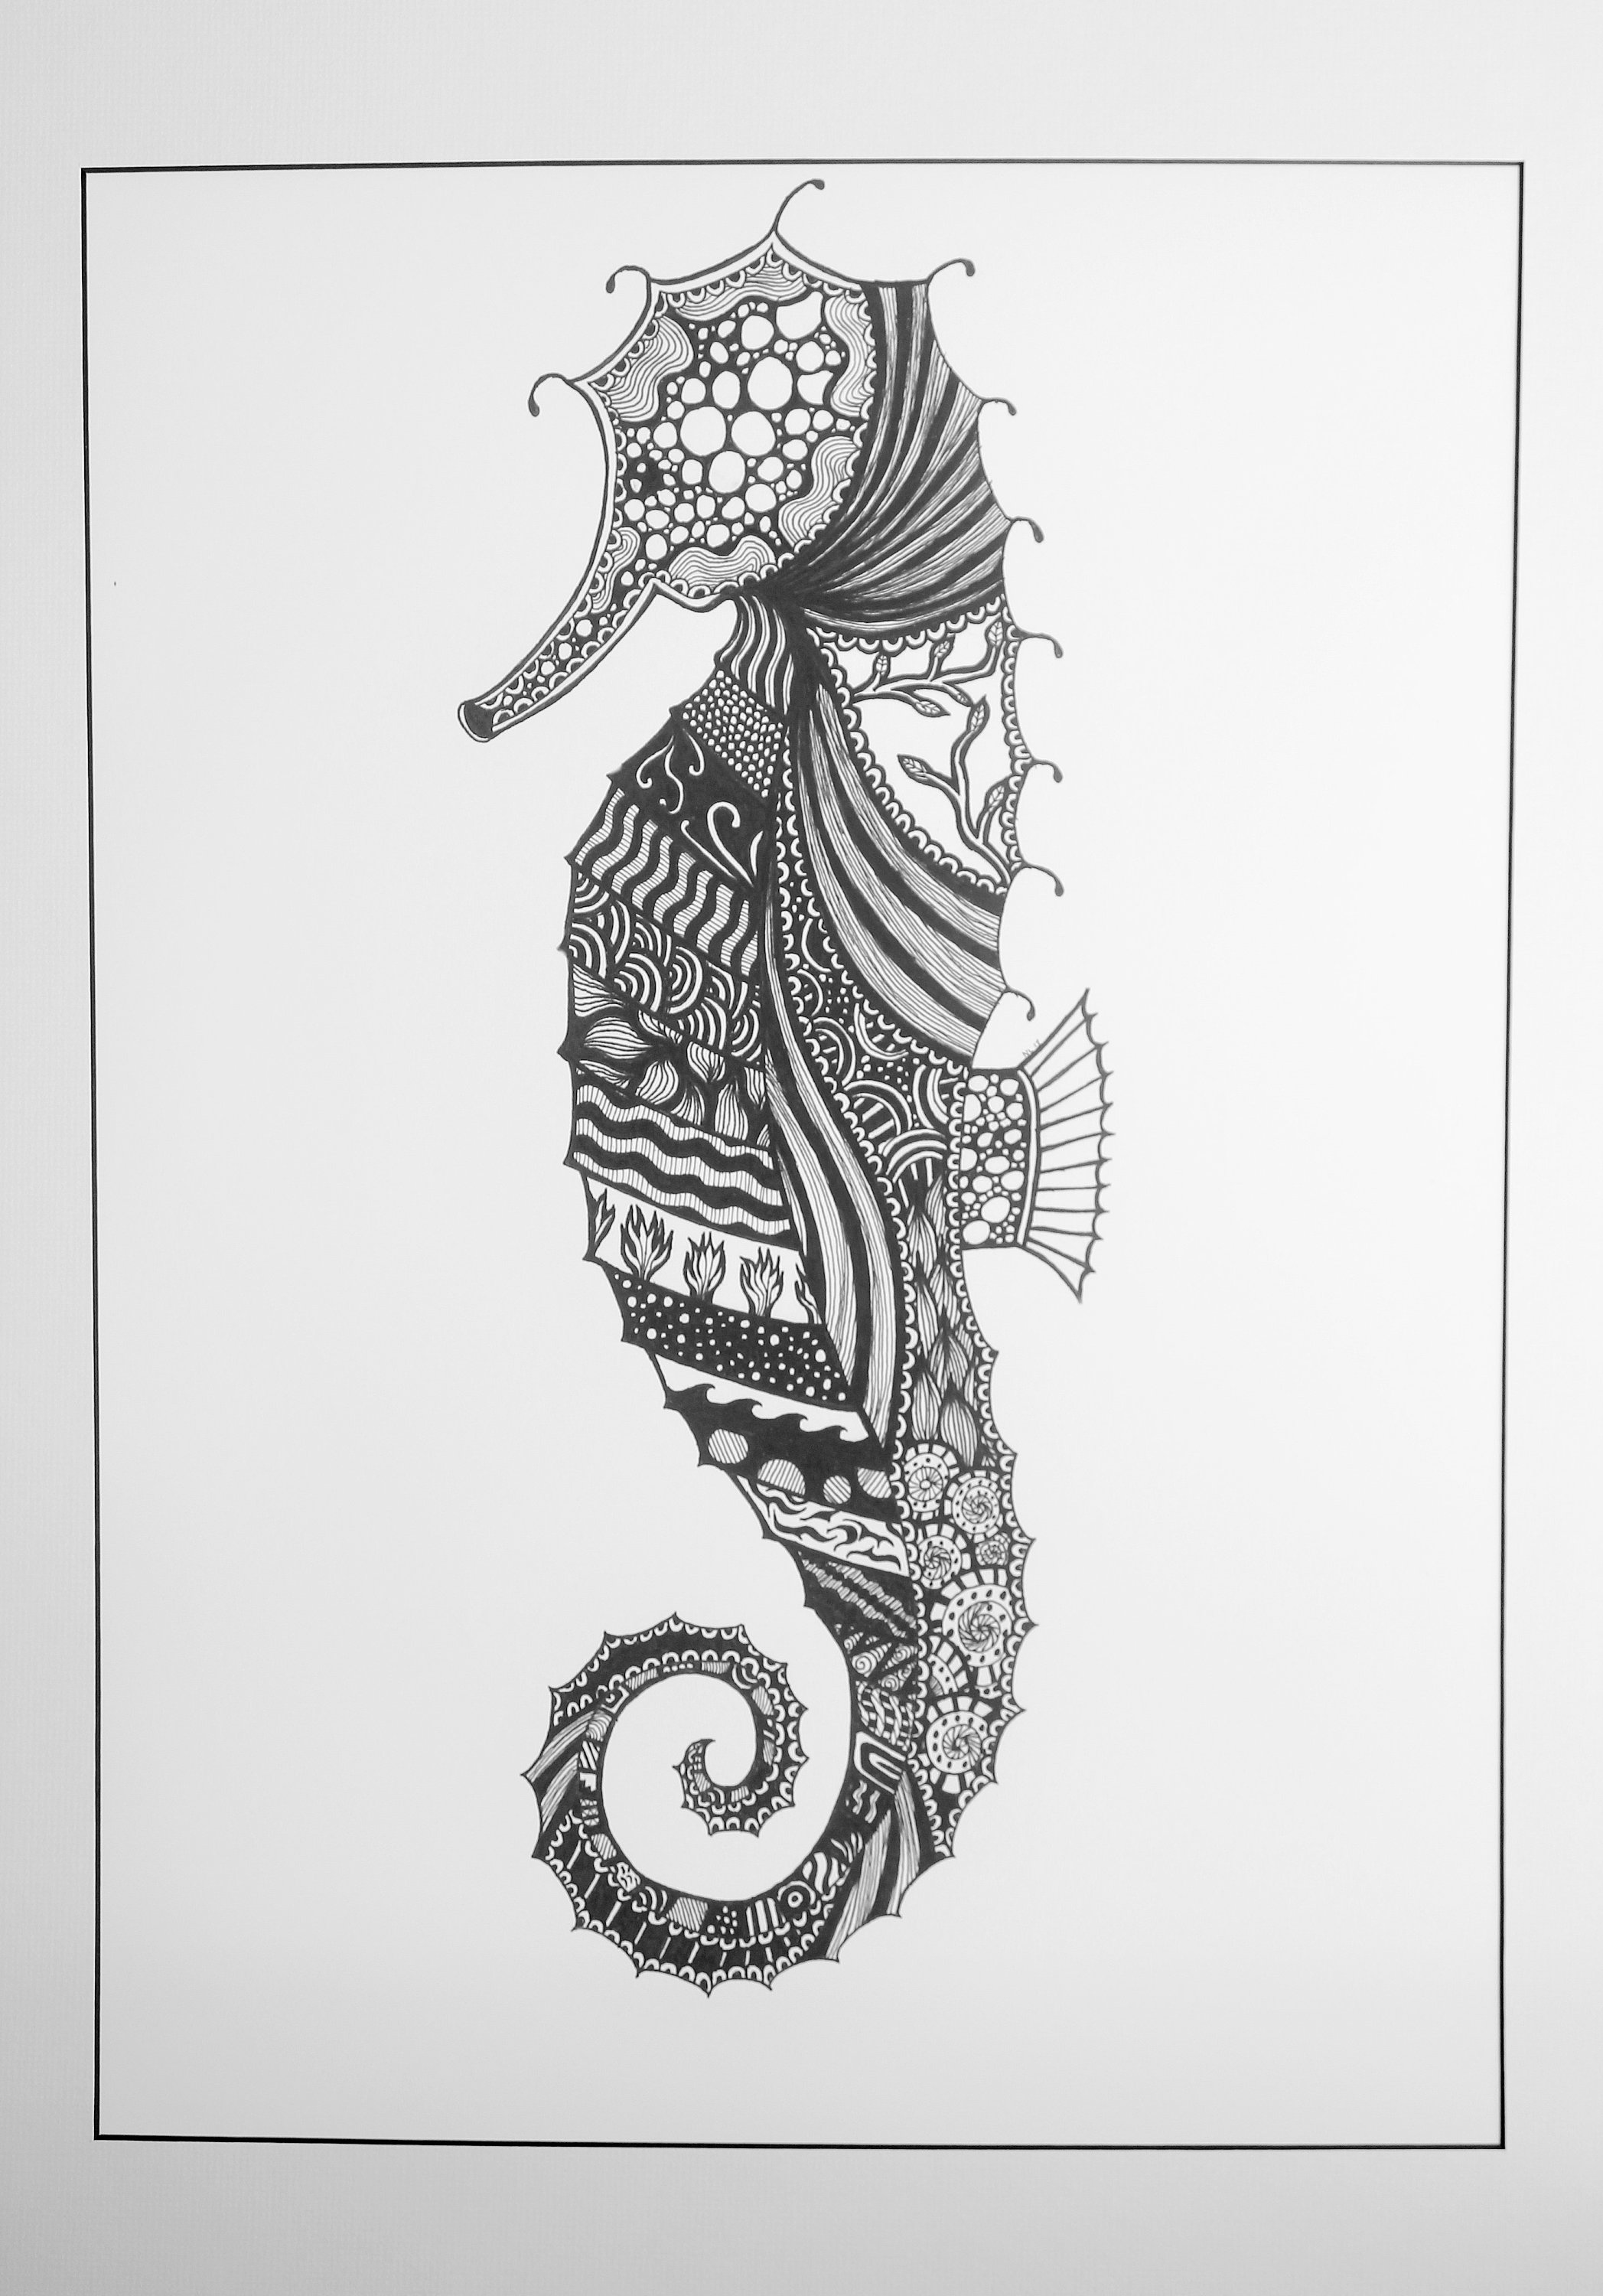 Intricate seahorse drawing.